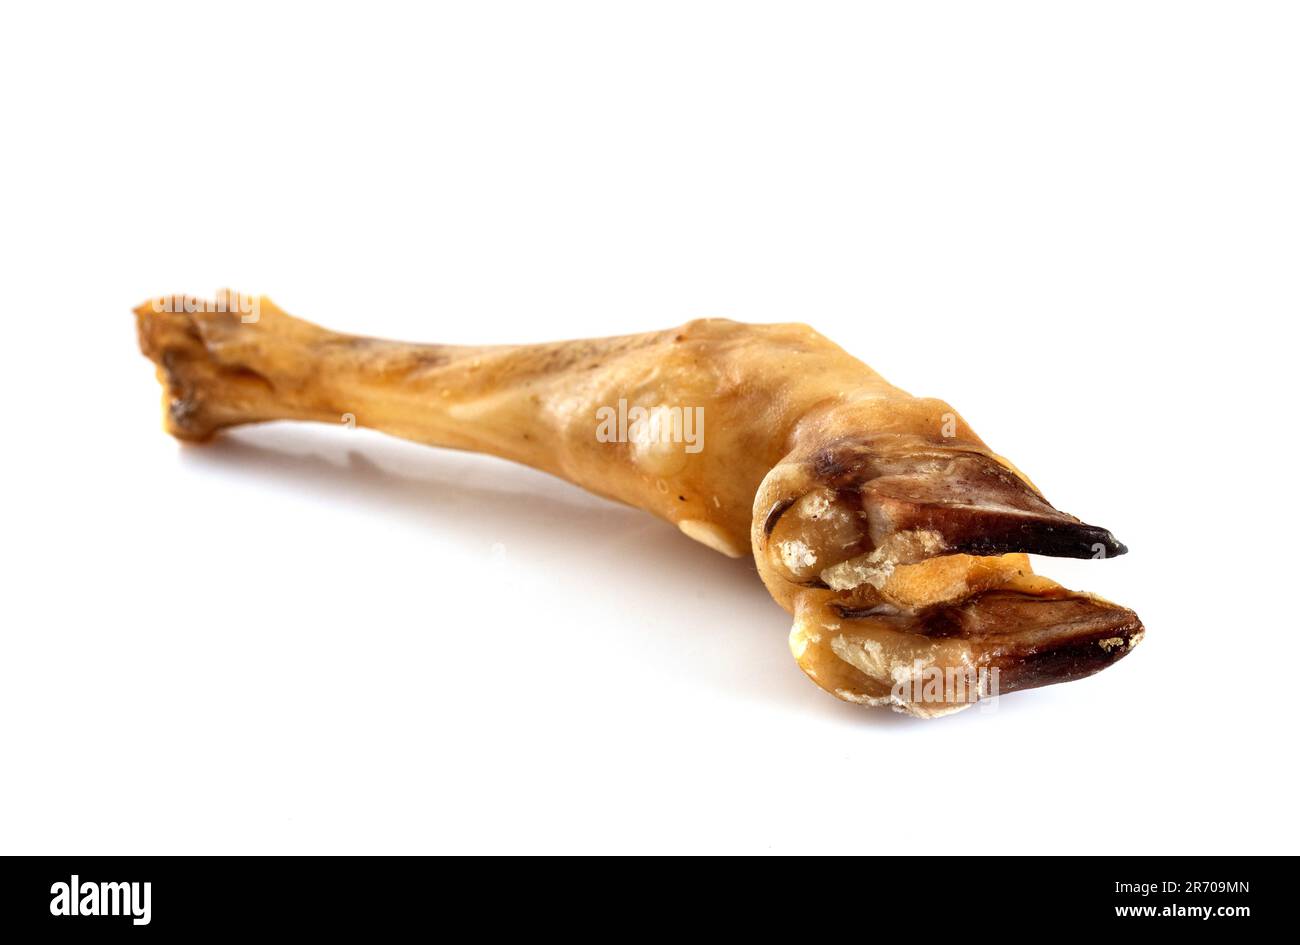 drying gnaw in front of white background Stock Photo